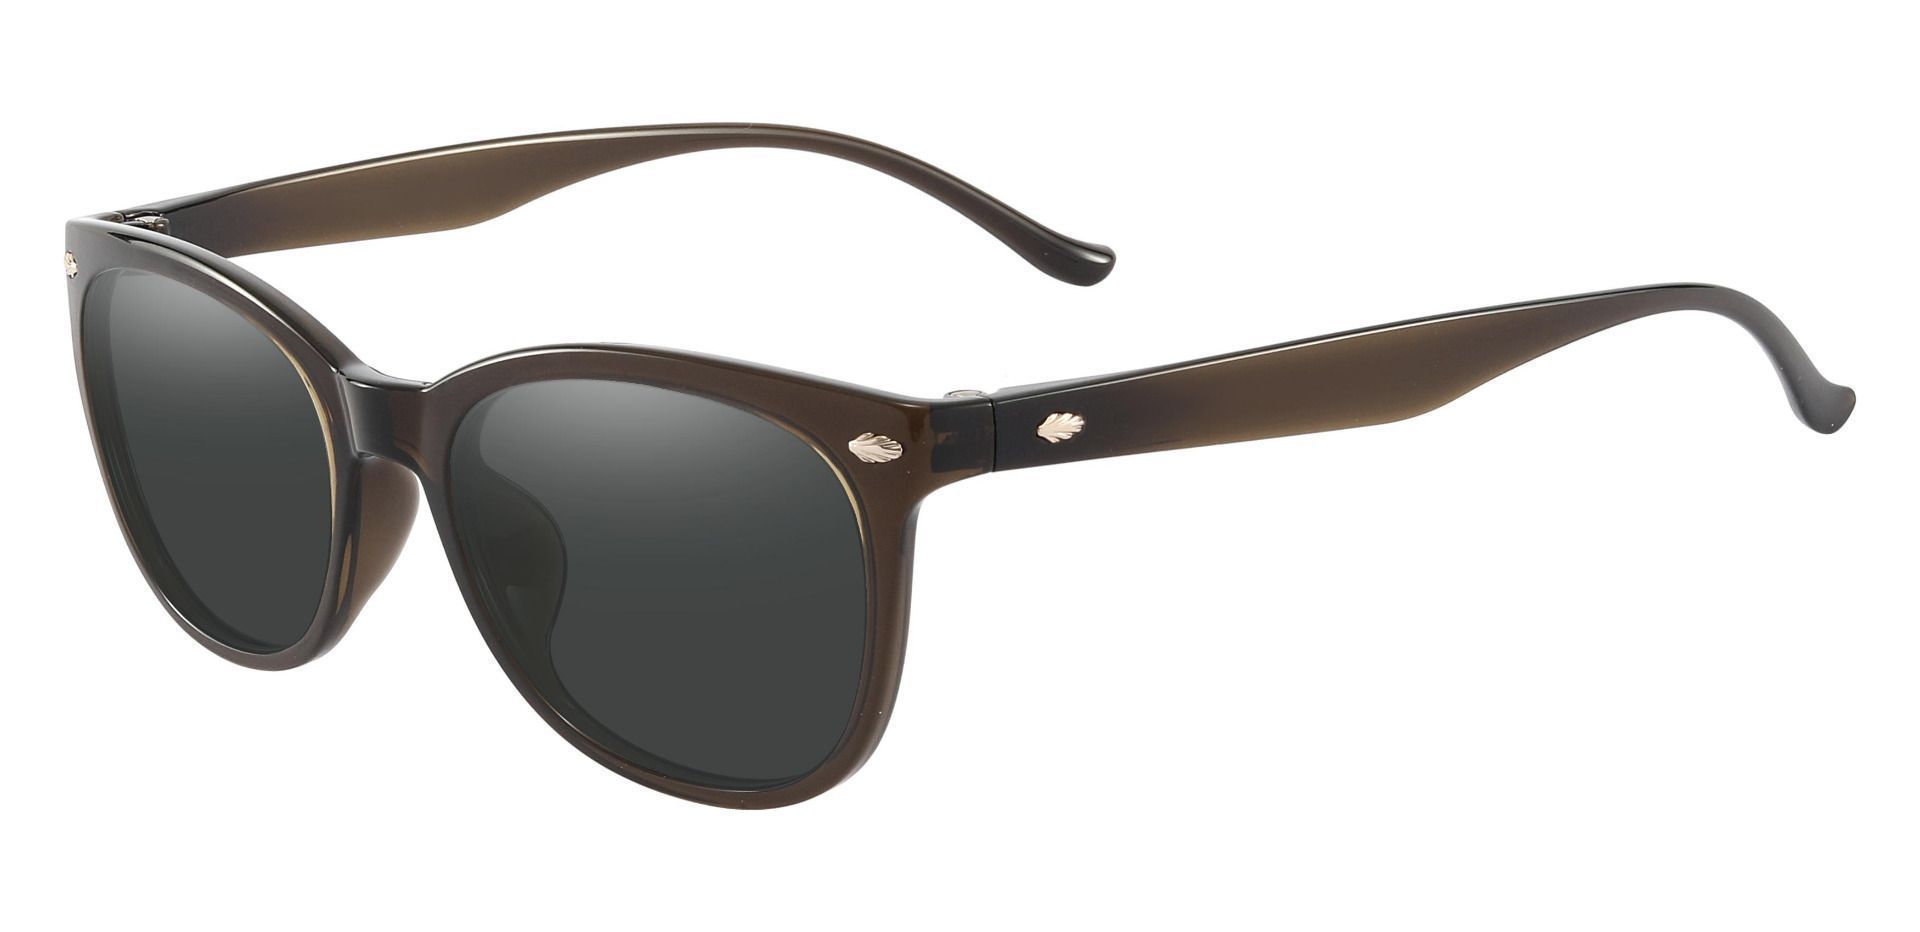 Pavilion Square Reading Sunglasses - Brown Frame With Gray Lenses